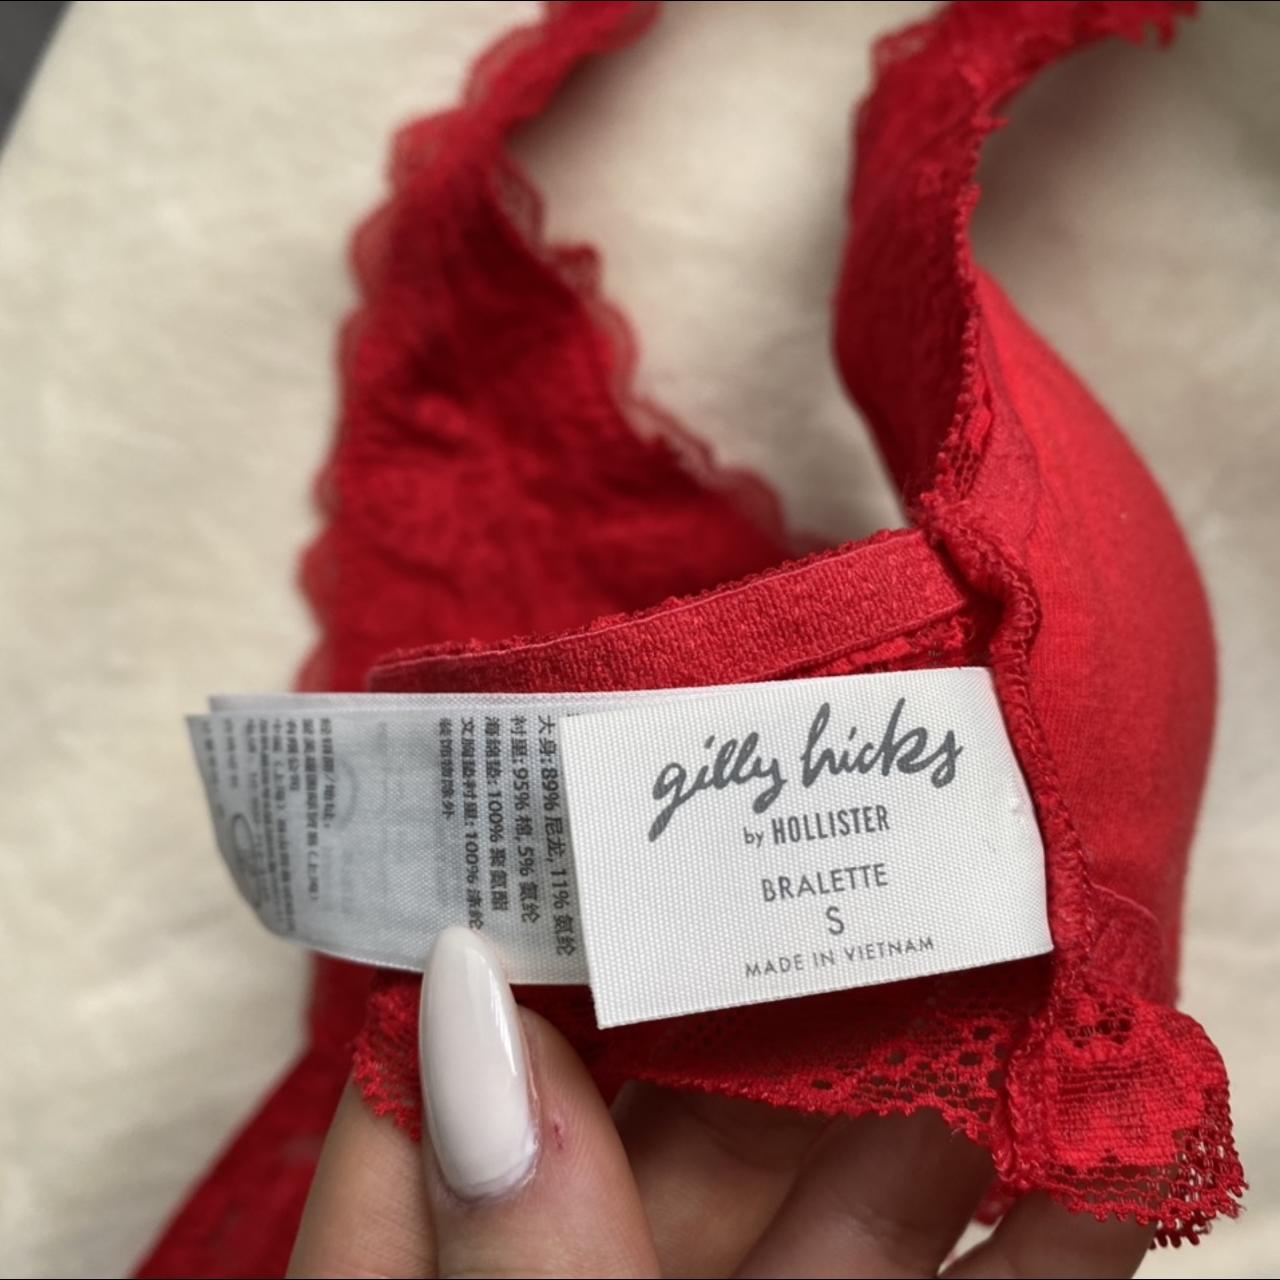 Hollister/Gilly Hicks red lace strappy bralette with - Depop